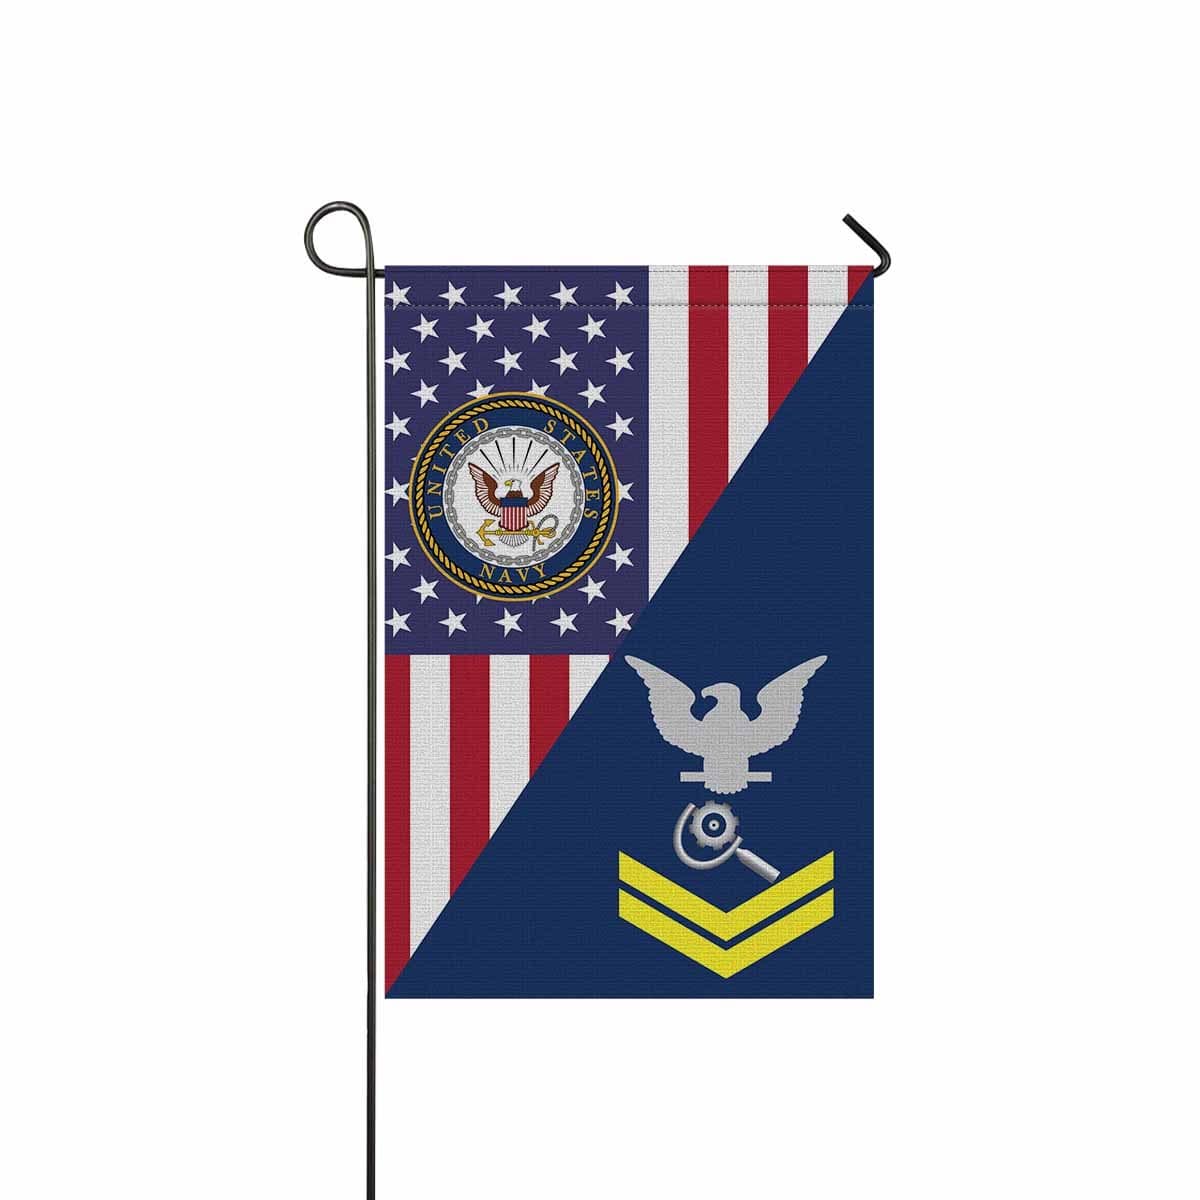 U.S Navy Machinery repairman Navy MR E-5 Gold Stripe Garden Flag/Yard Flag 12 inches x 18 inches Twin-Side Printing-GDFlag-Navy-Rating-Veterans Nation